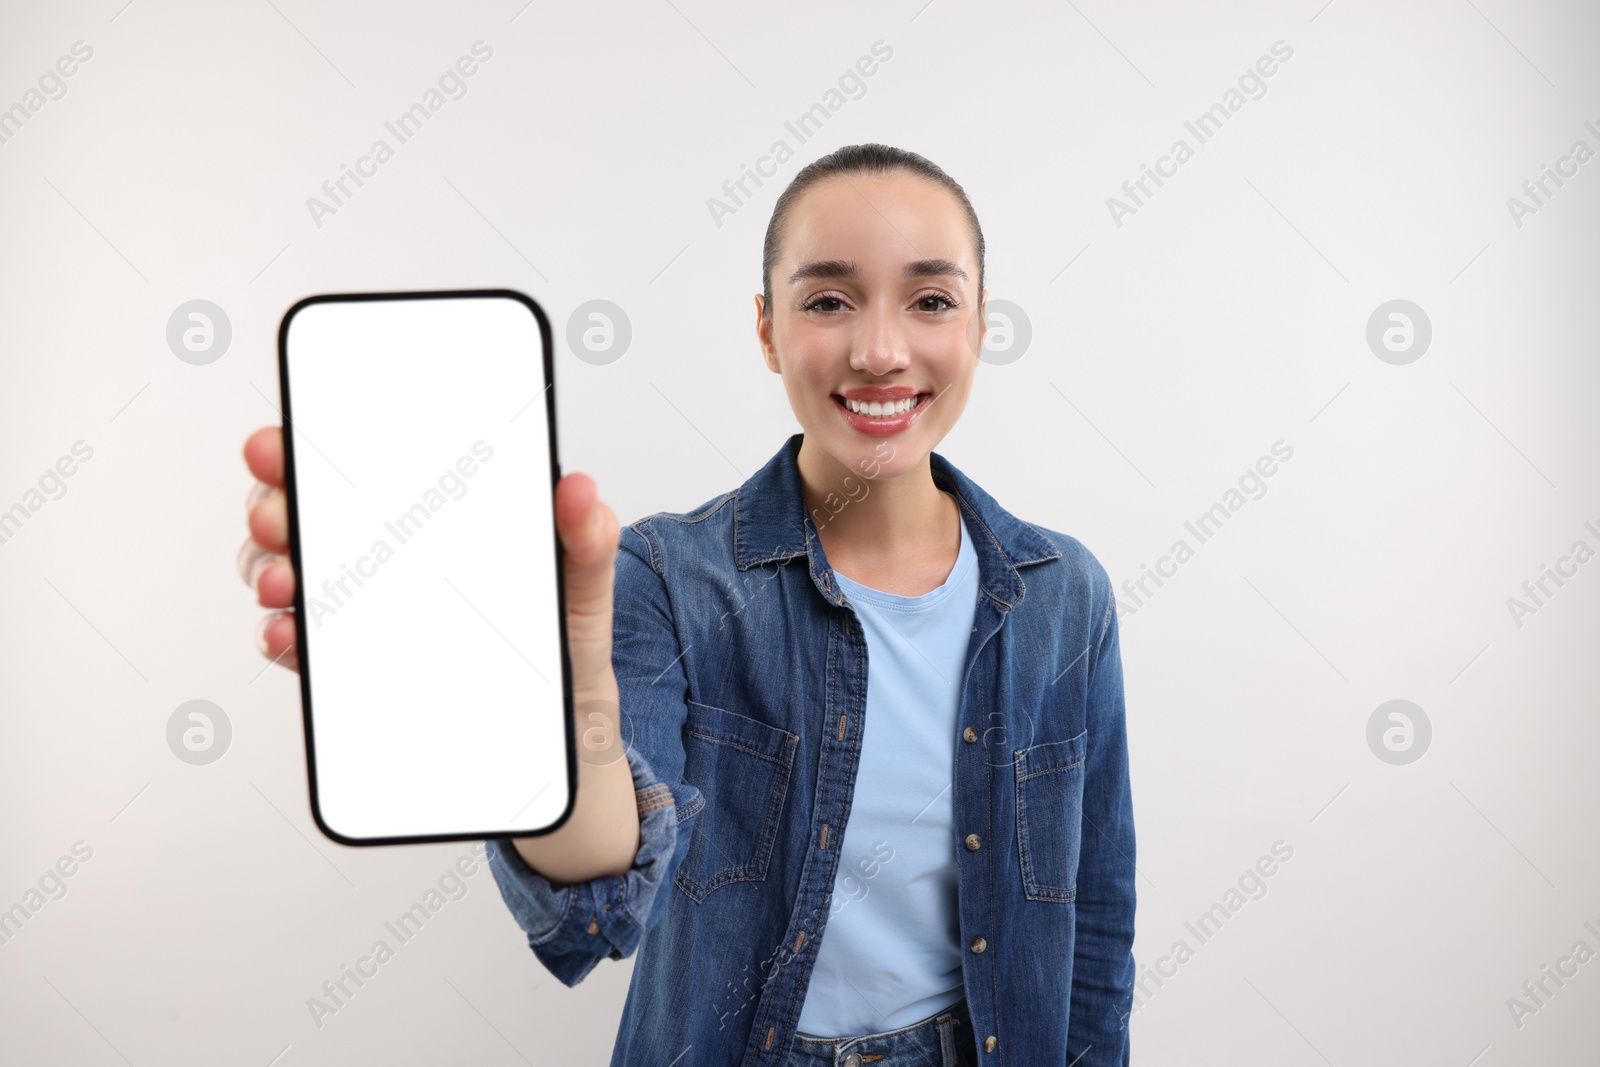 Photo of Young woman showing smartphone in hand on white background